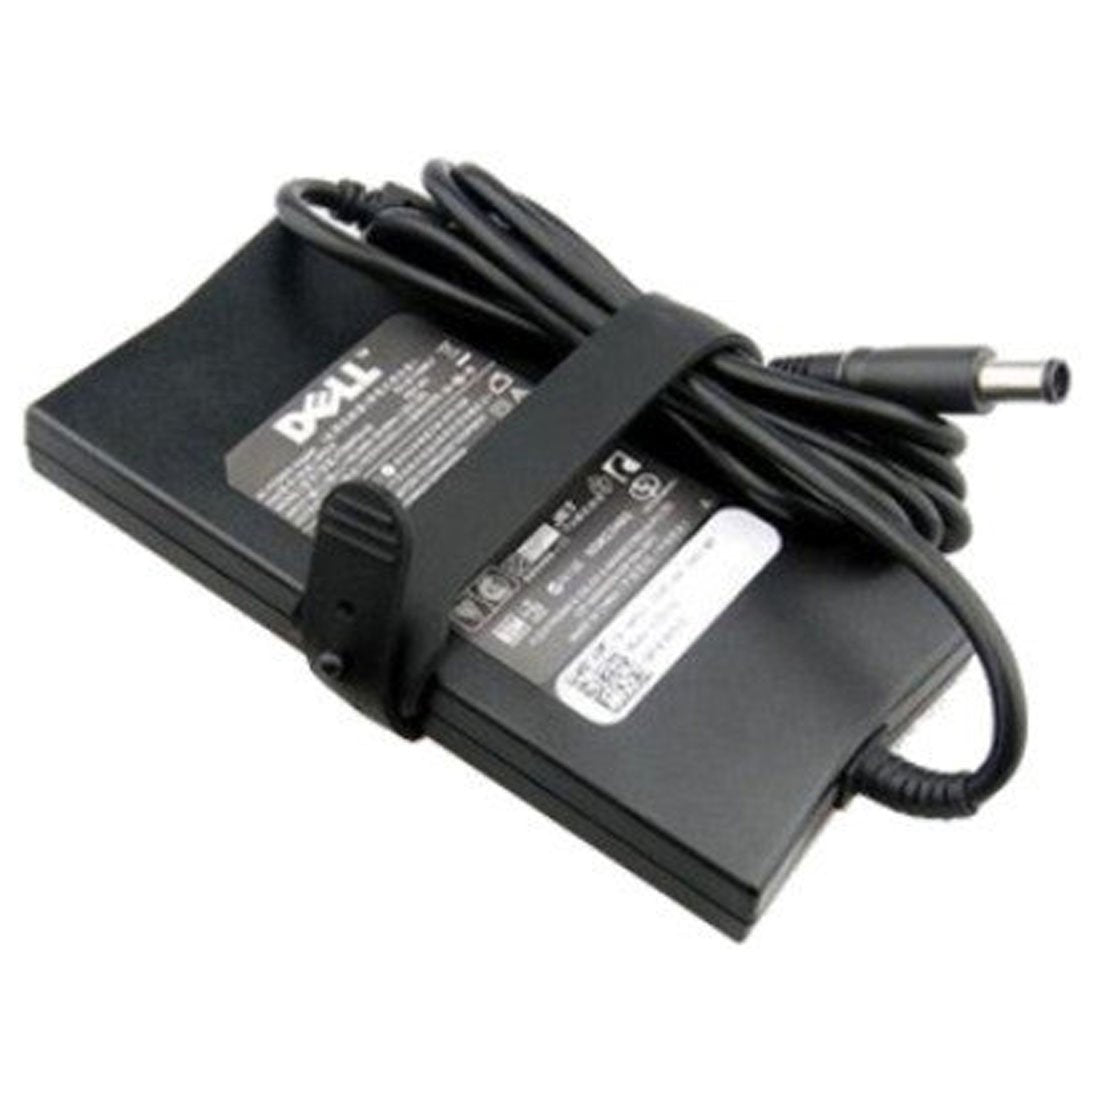 Dell Original 130W 19.5V 7.4mm Pin Laptop Charger Adapter for Inspiron 13R N3010 With Power Cord